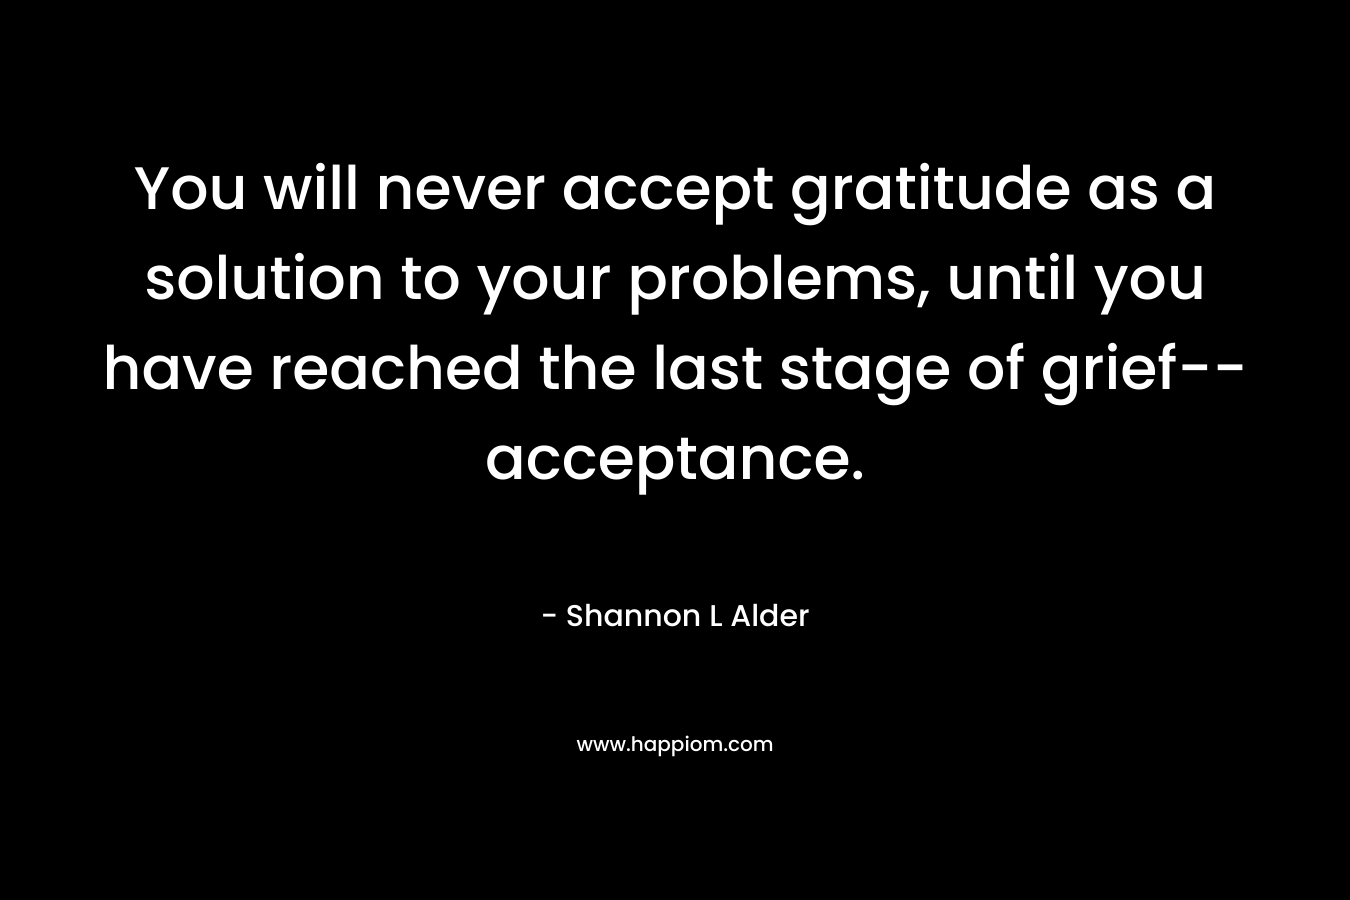 You will never accept gratitude as a solution to your problems, until you have reached the last stage of grief–acceptance. – Shannon L Alder